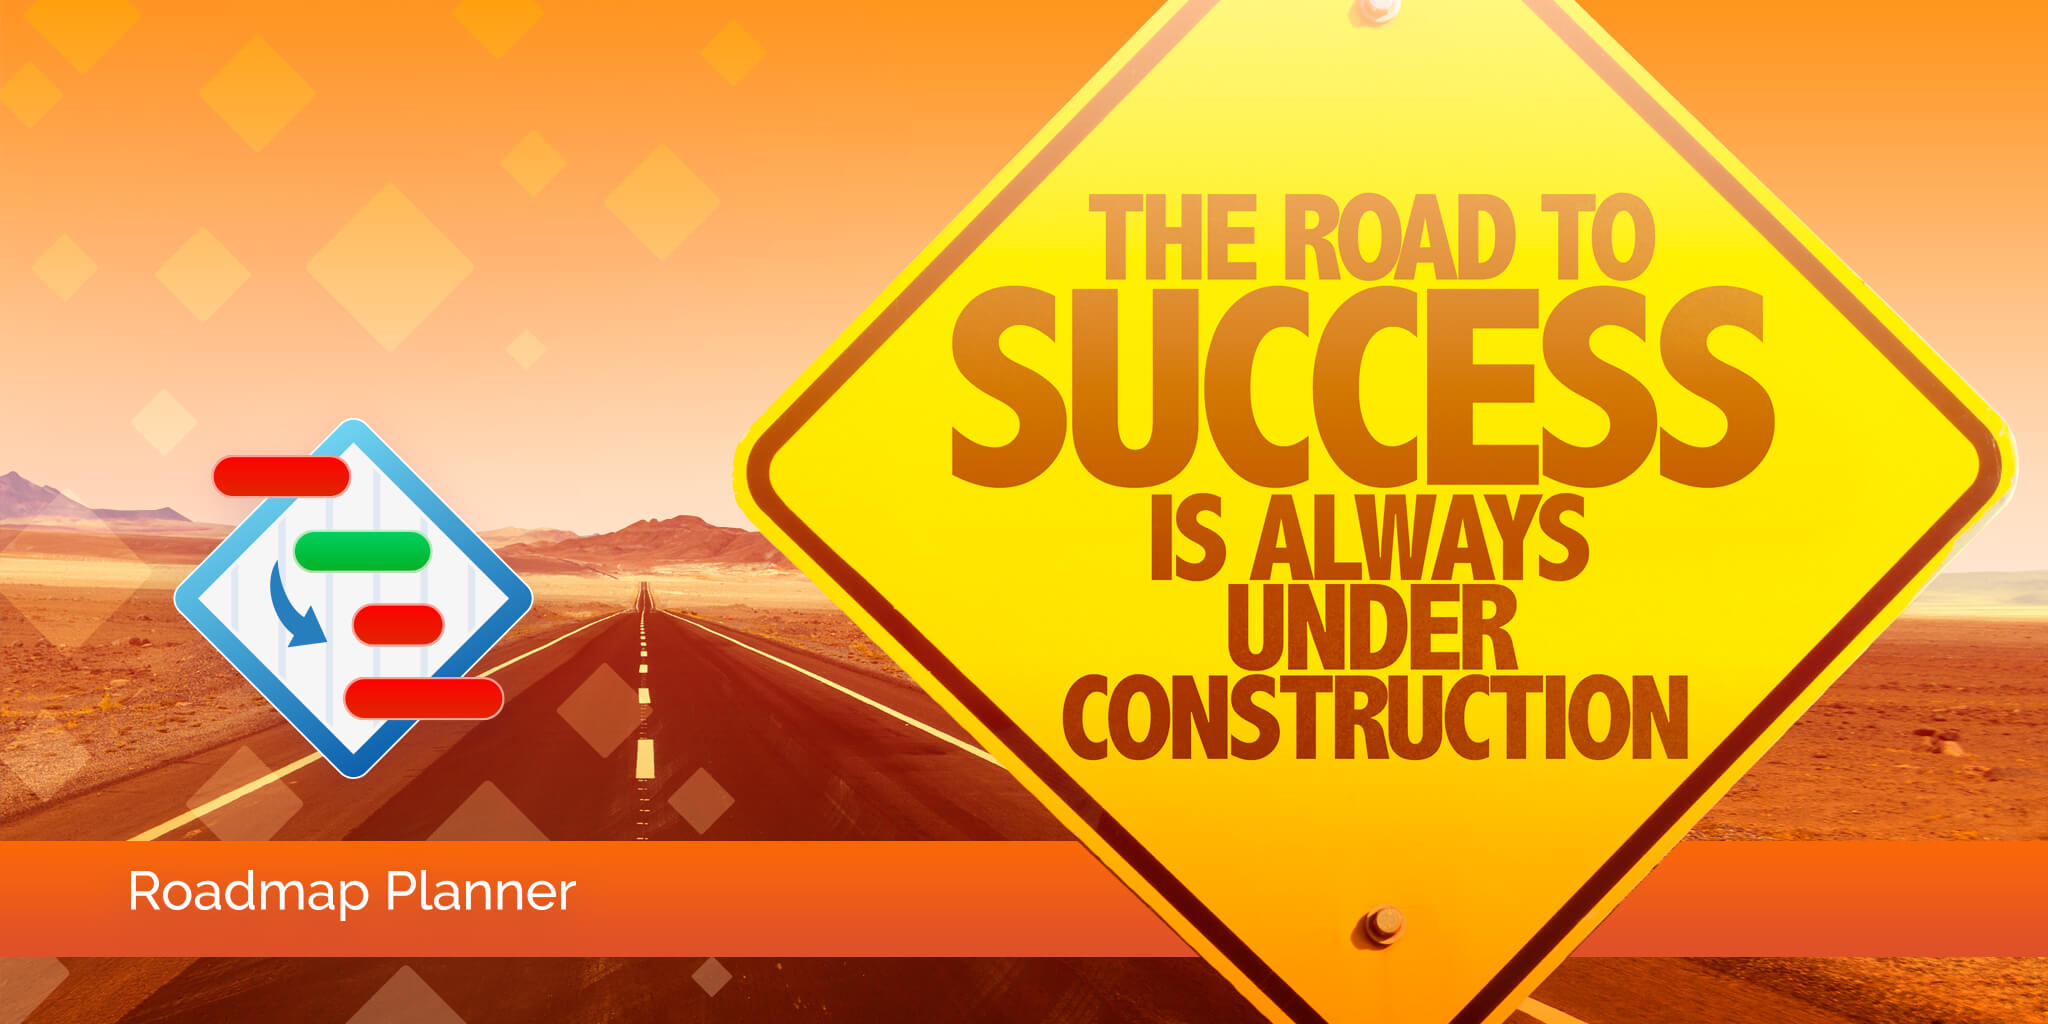 The road to success is always under construction - build it!